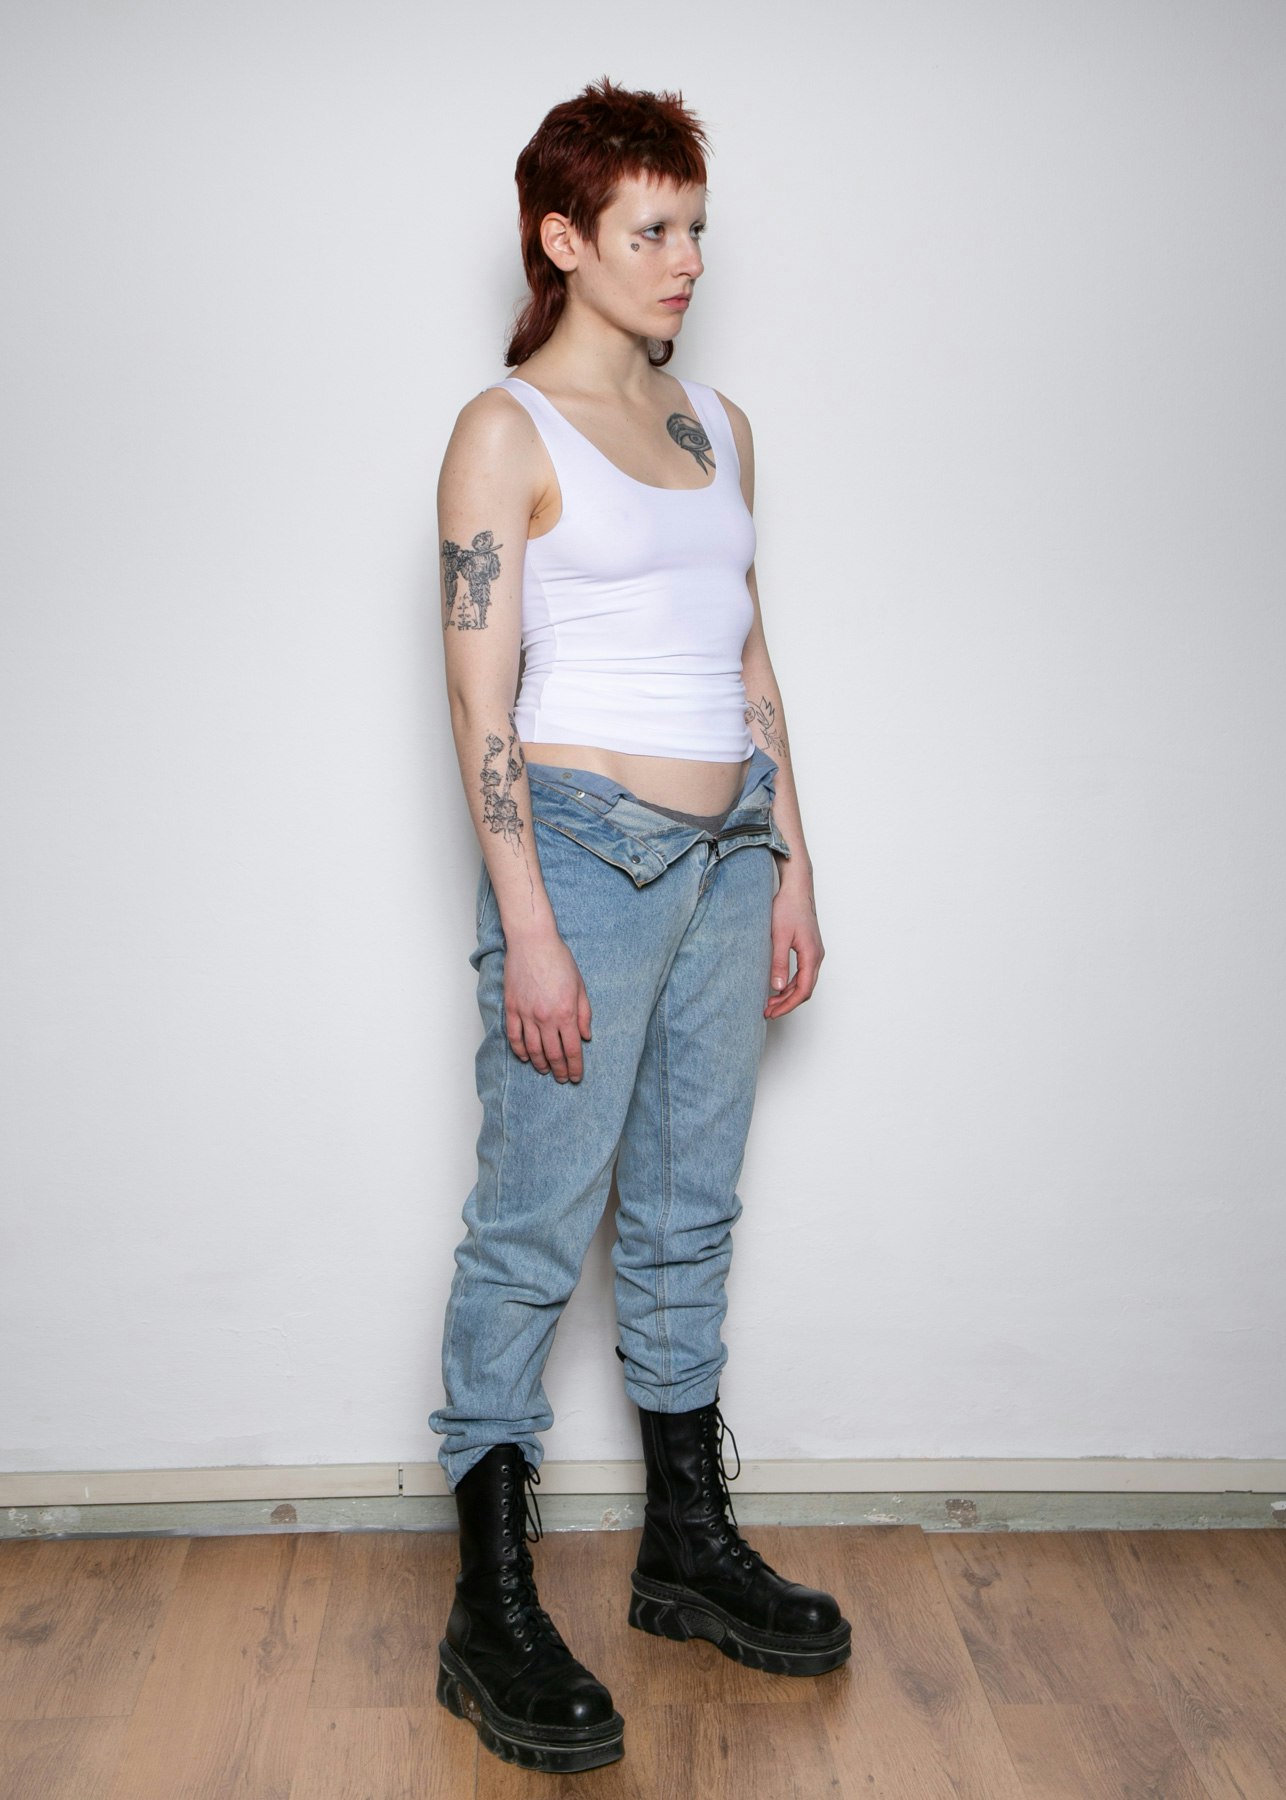 An image of Erica Rossi